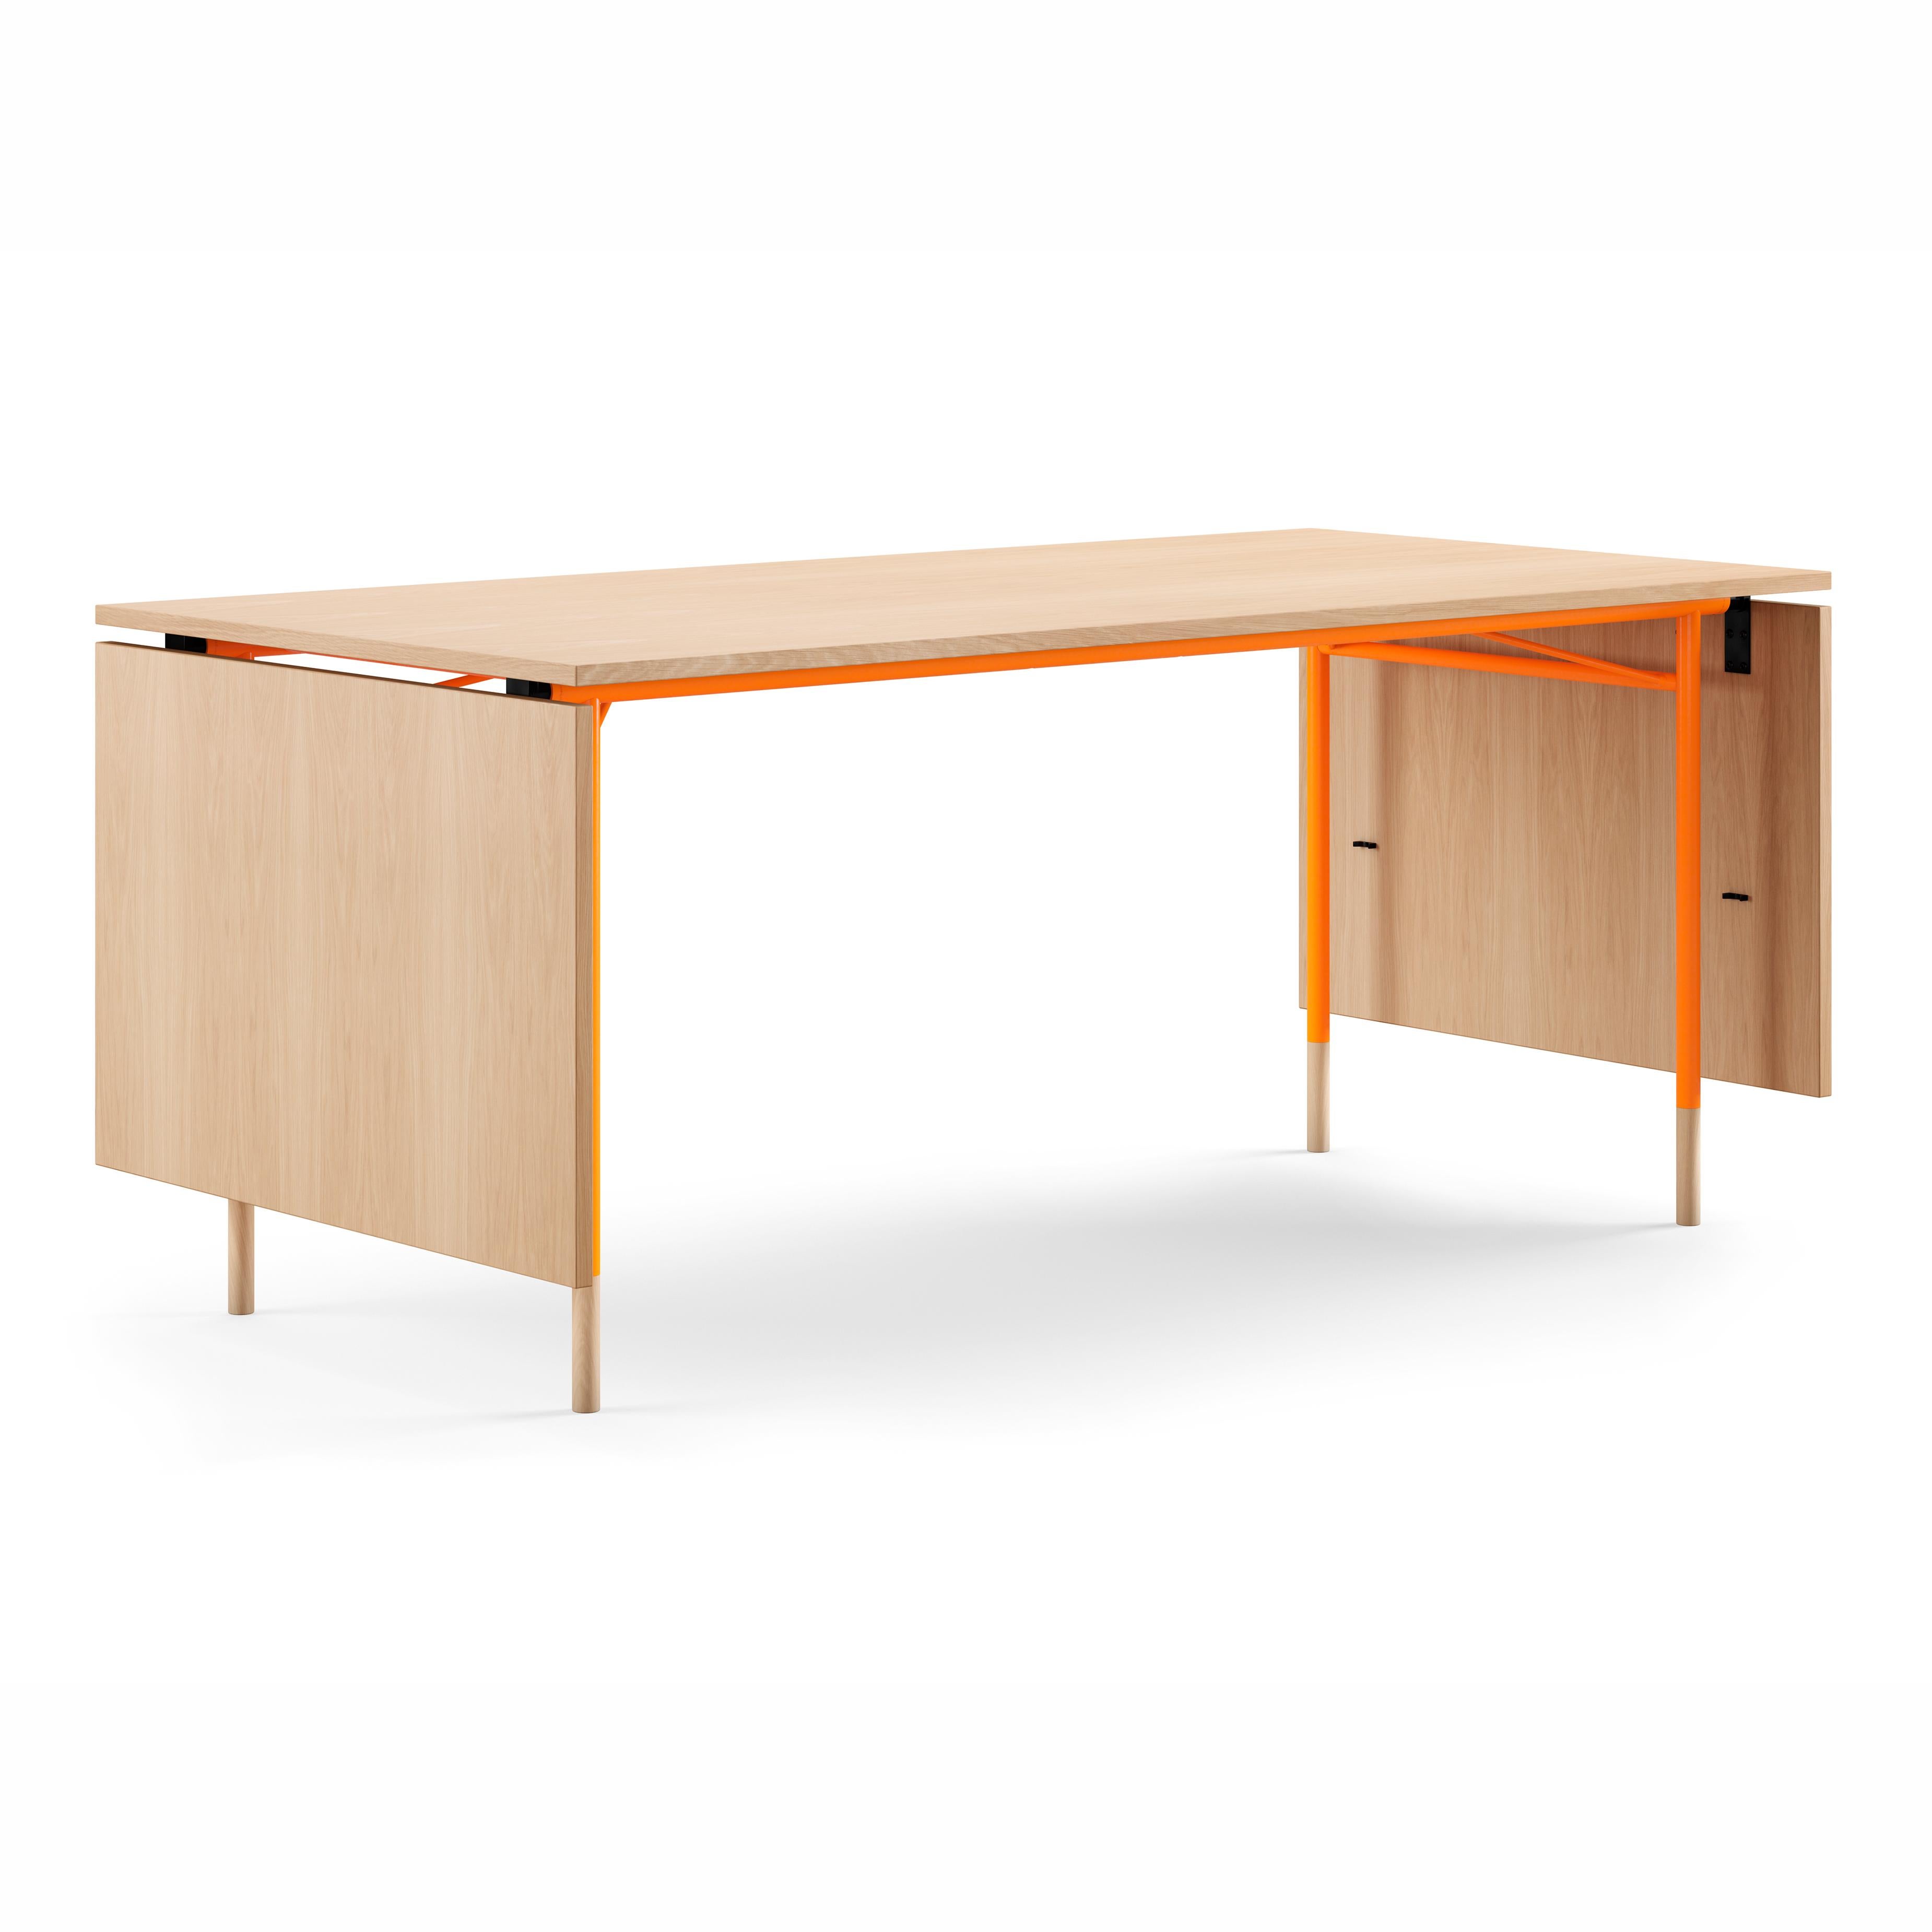 Danish Finn Juhl Nyhavn Dining Table with Two Drop Leaves, Lino and Wood